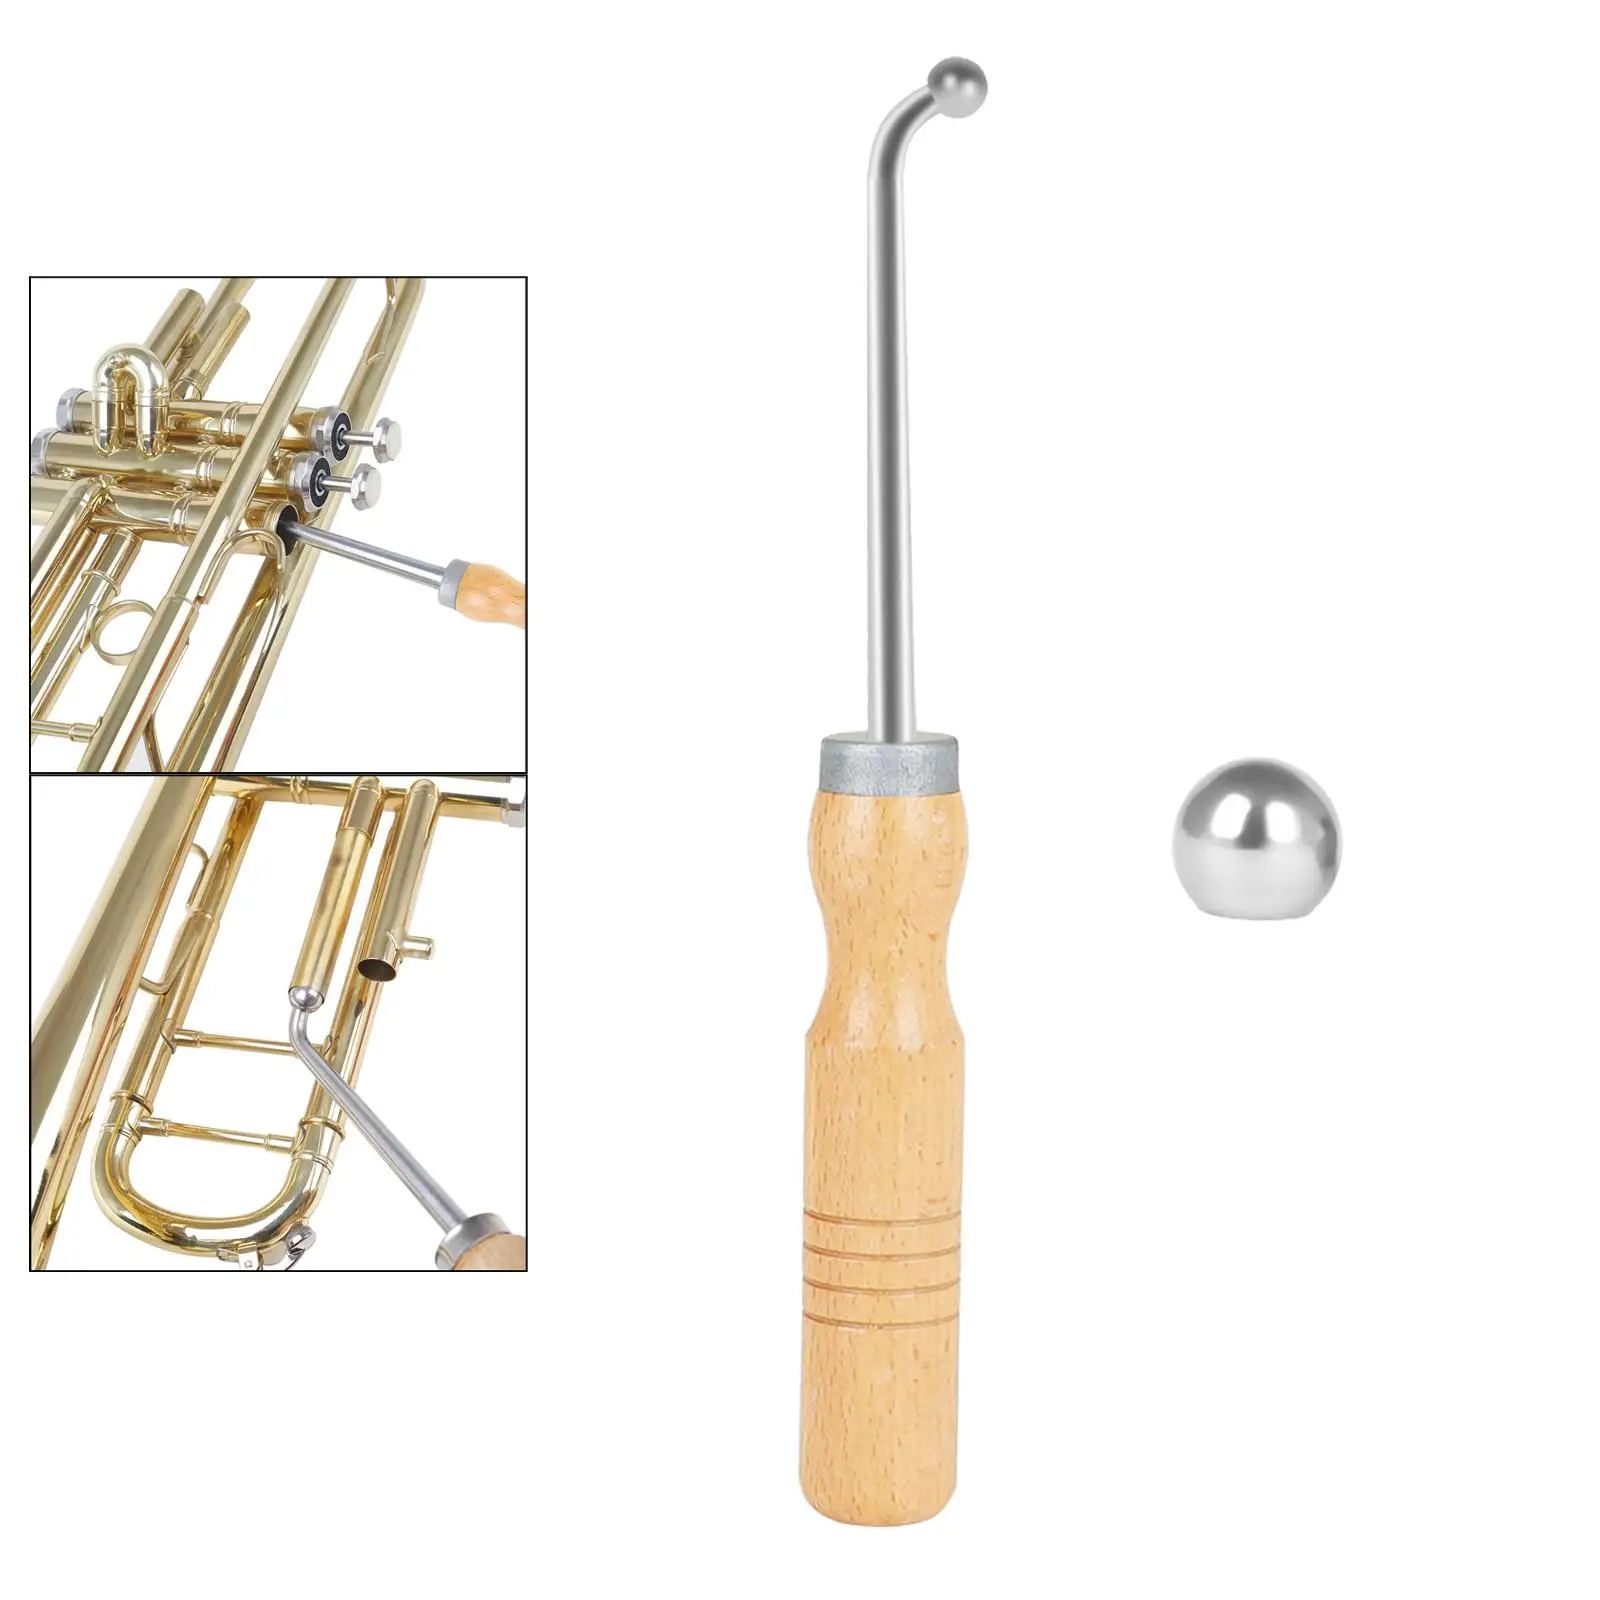 Heavy Duty Trumpet Repair Tool Music Instrument Maintenance Care for Trumpet